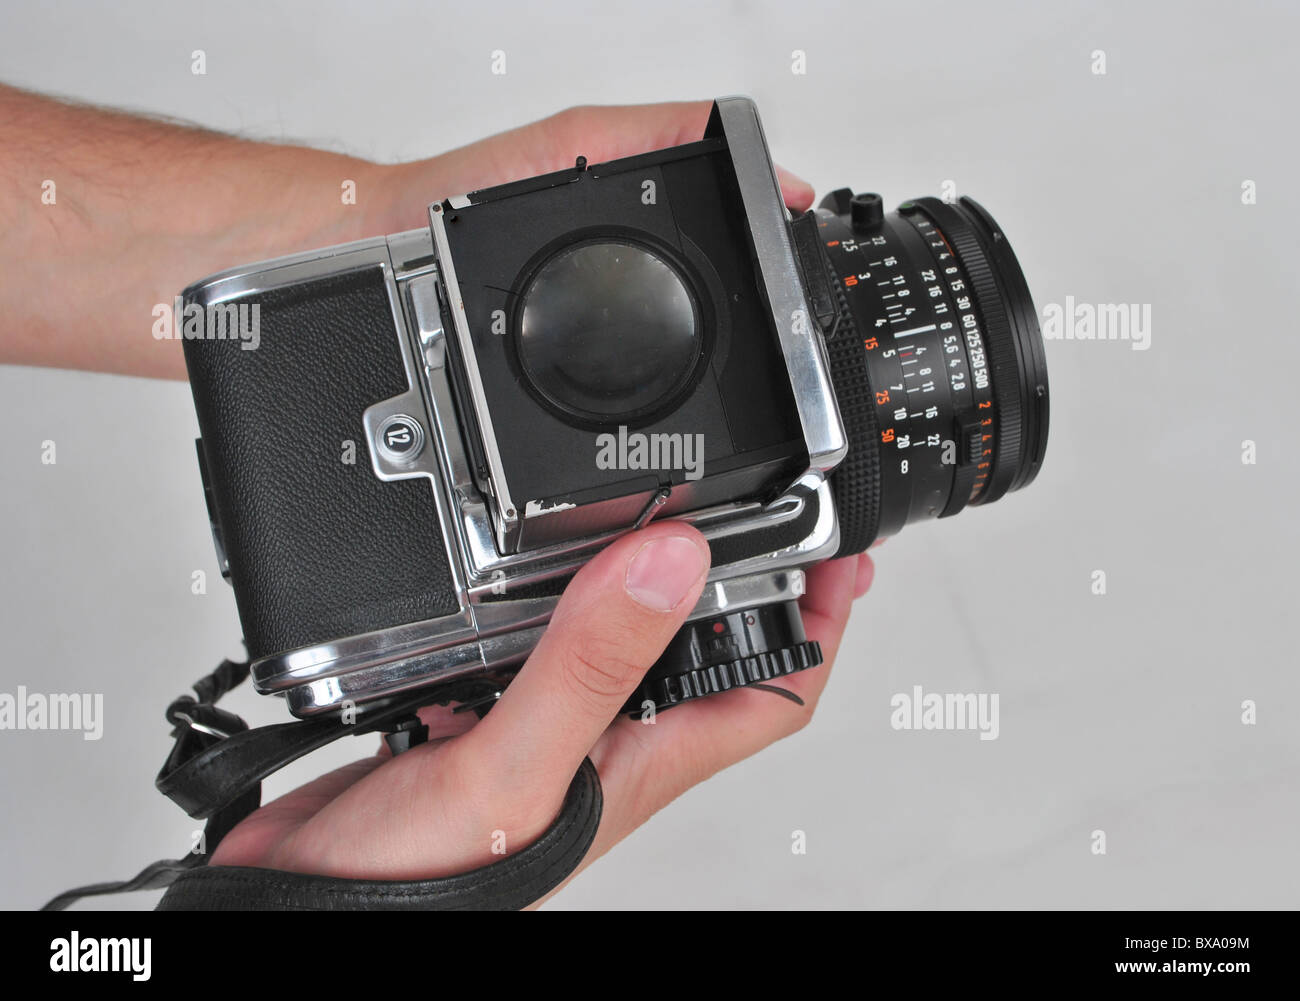 6X6 format camera with lens Stock Photo